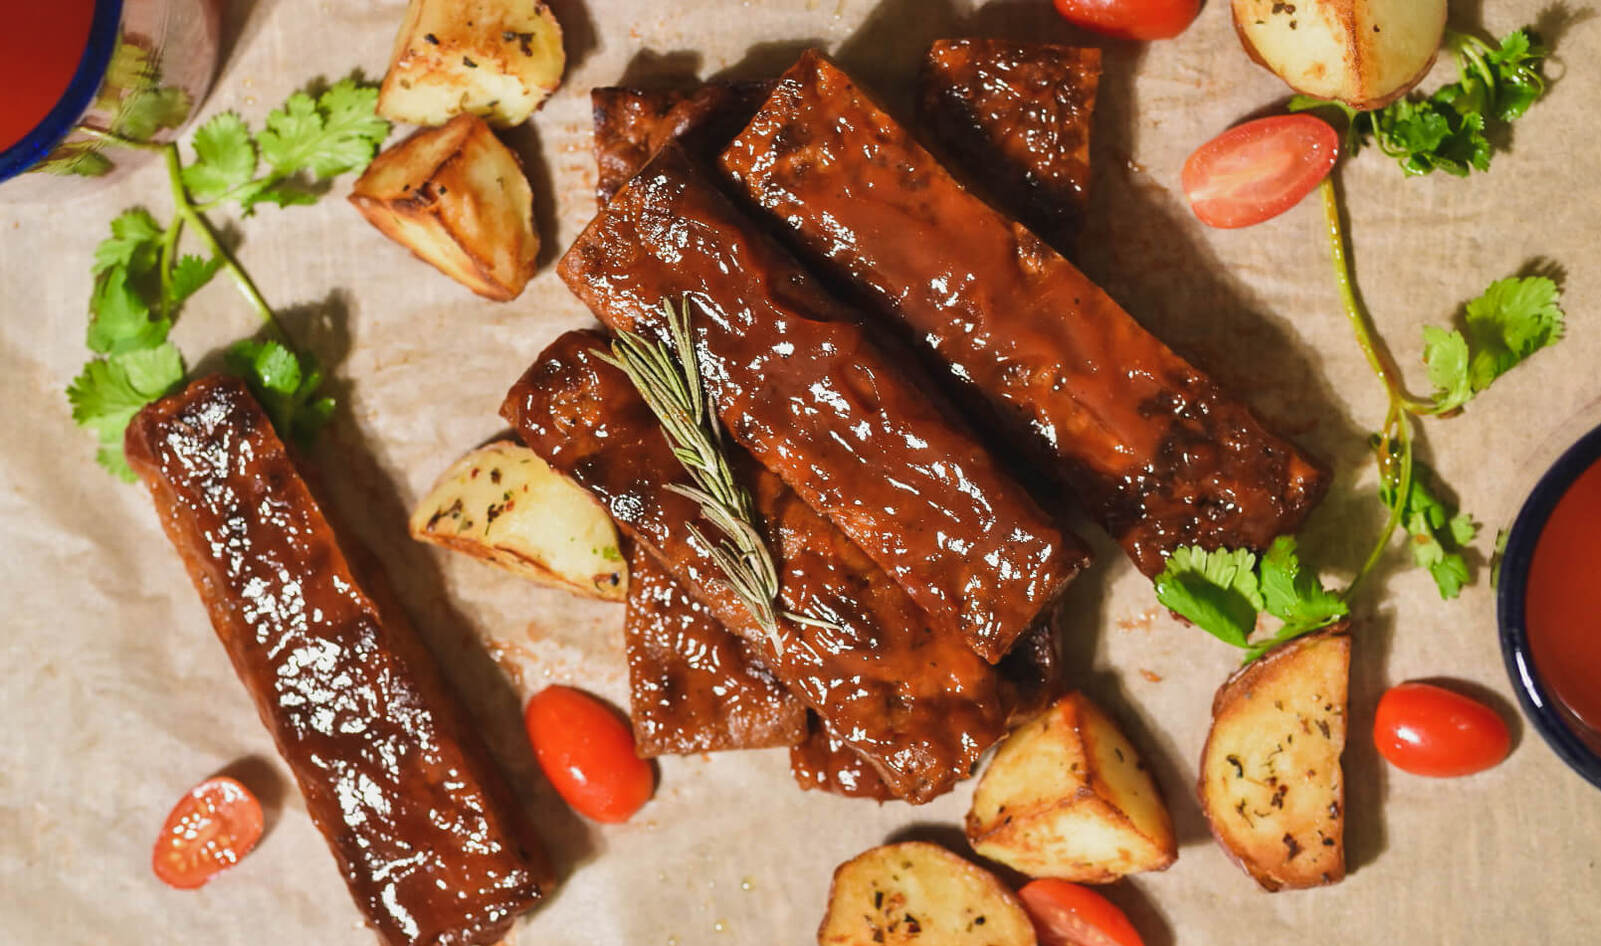 The Boneless Butcher Reimagines Texas-Style Ribs and Steak With Plants